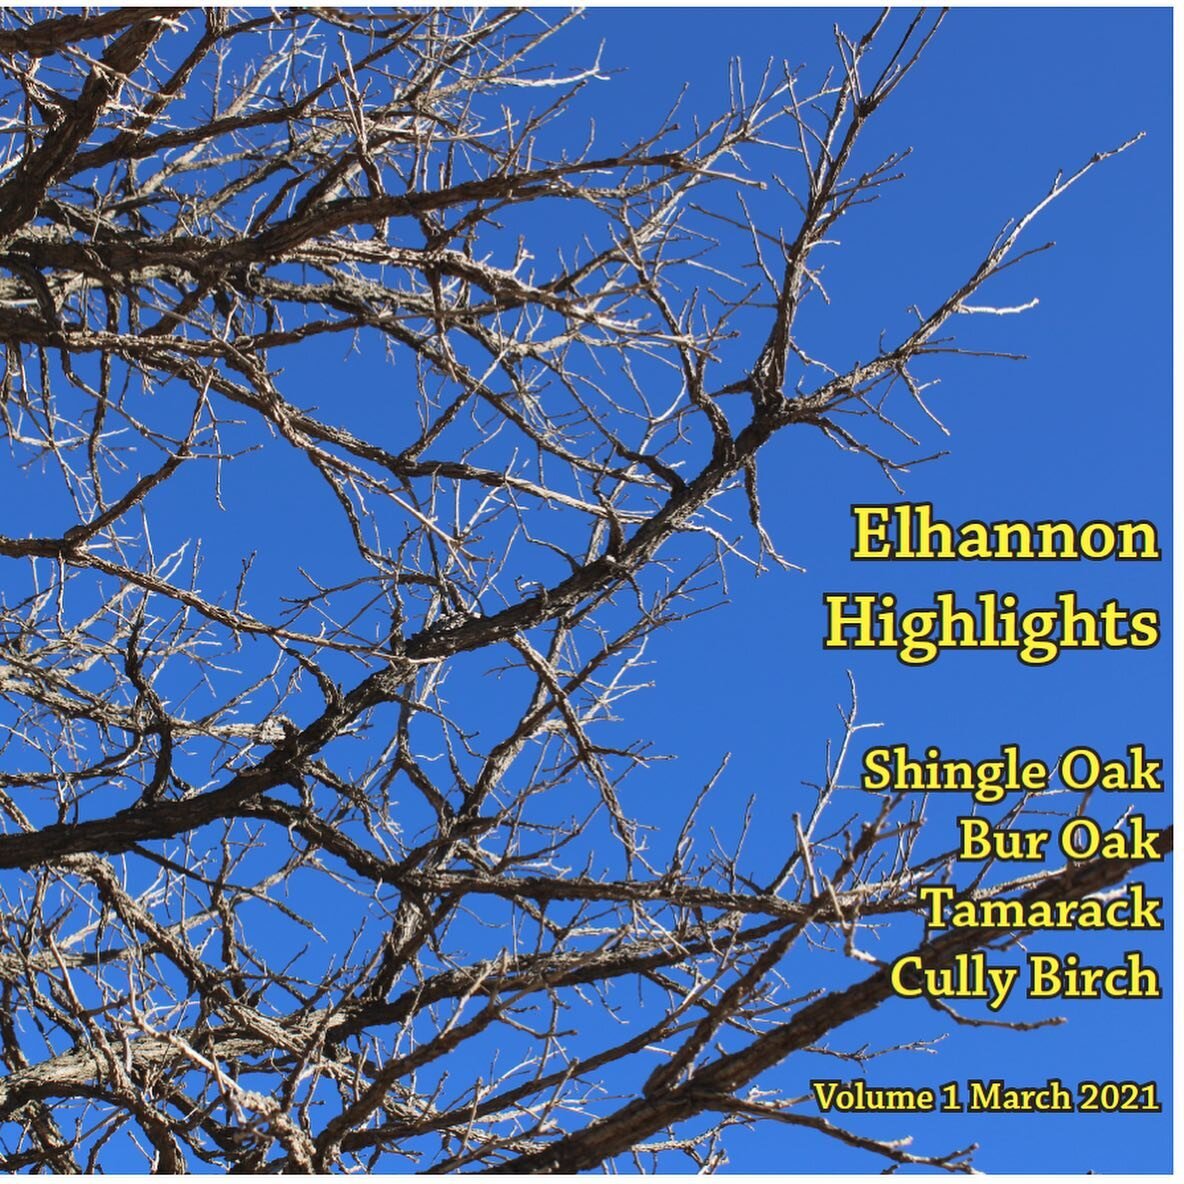 Proud to announce our first Elhannon Highlights! It&rsquo;s our monthly publication that takes a closer look at some of our favorite trees. Head over to our website to download. #shingleoak #buroak #tamarack #heritagebirch